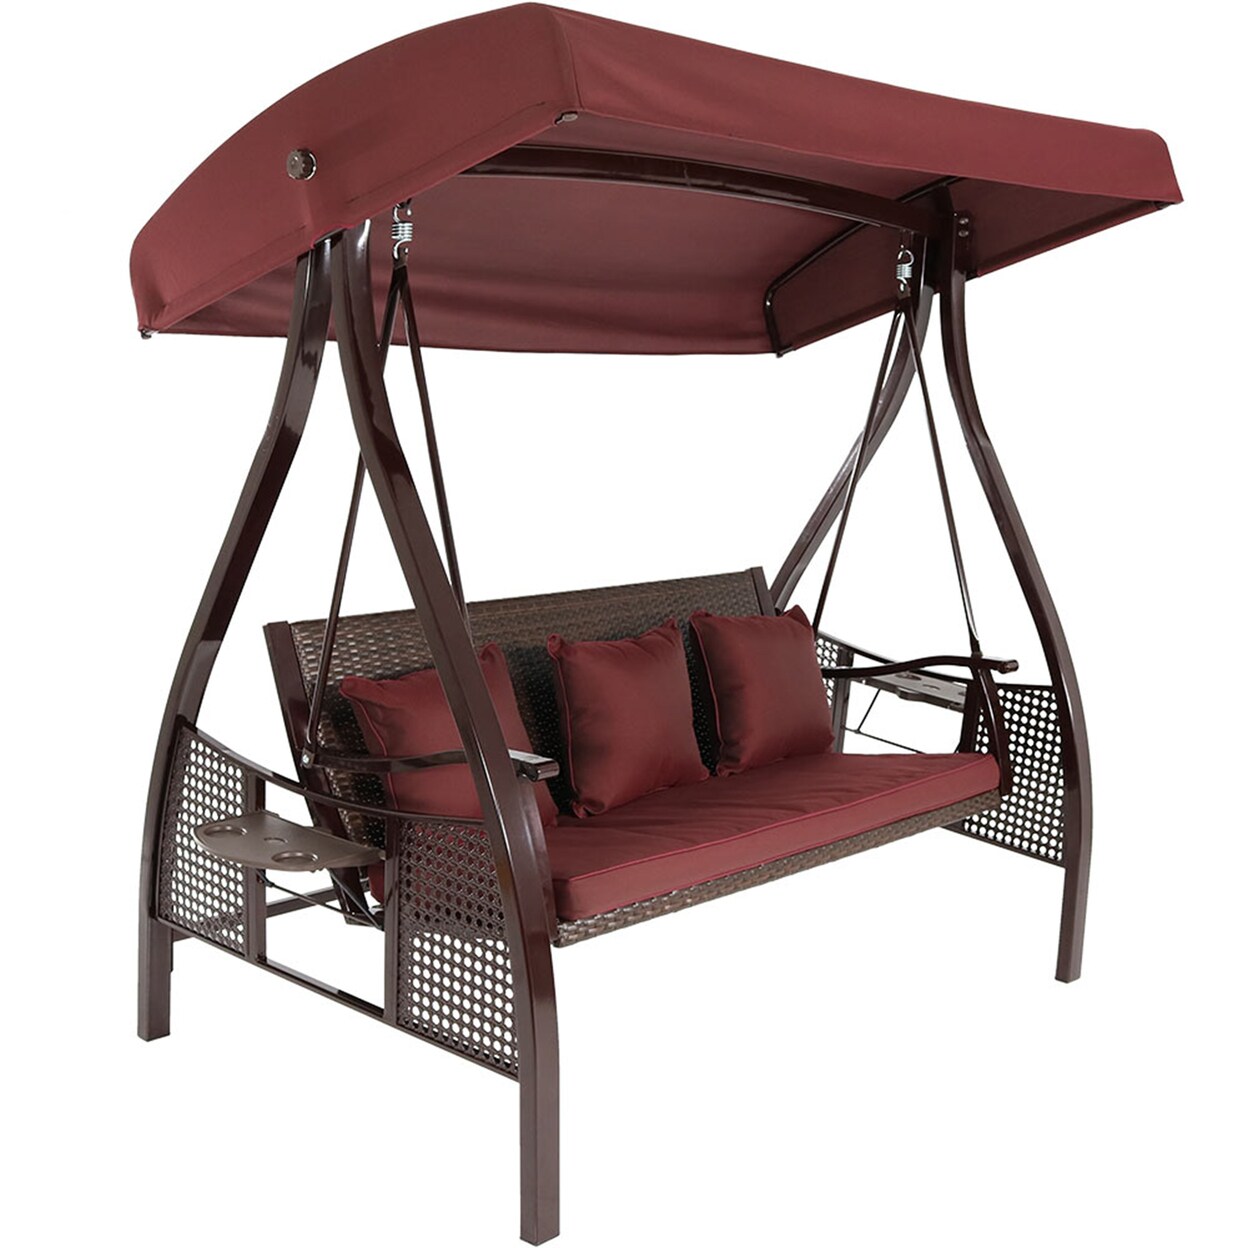 Sunnydaze   3-Person Steel Patio Swing Bench with Side Tables/Canopy - Maroon